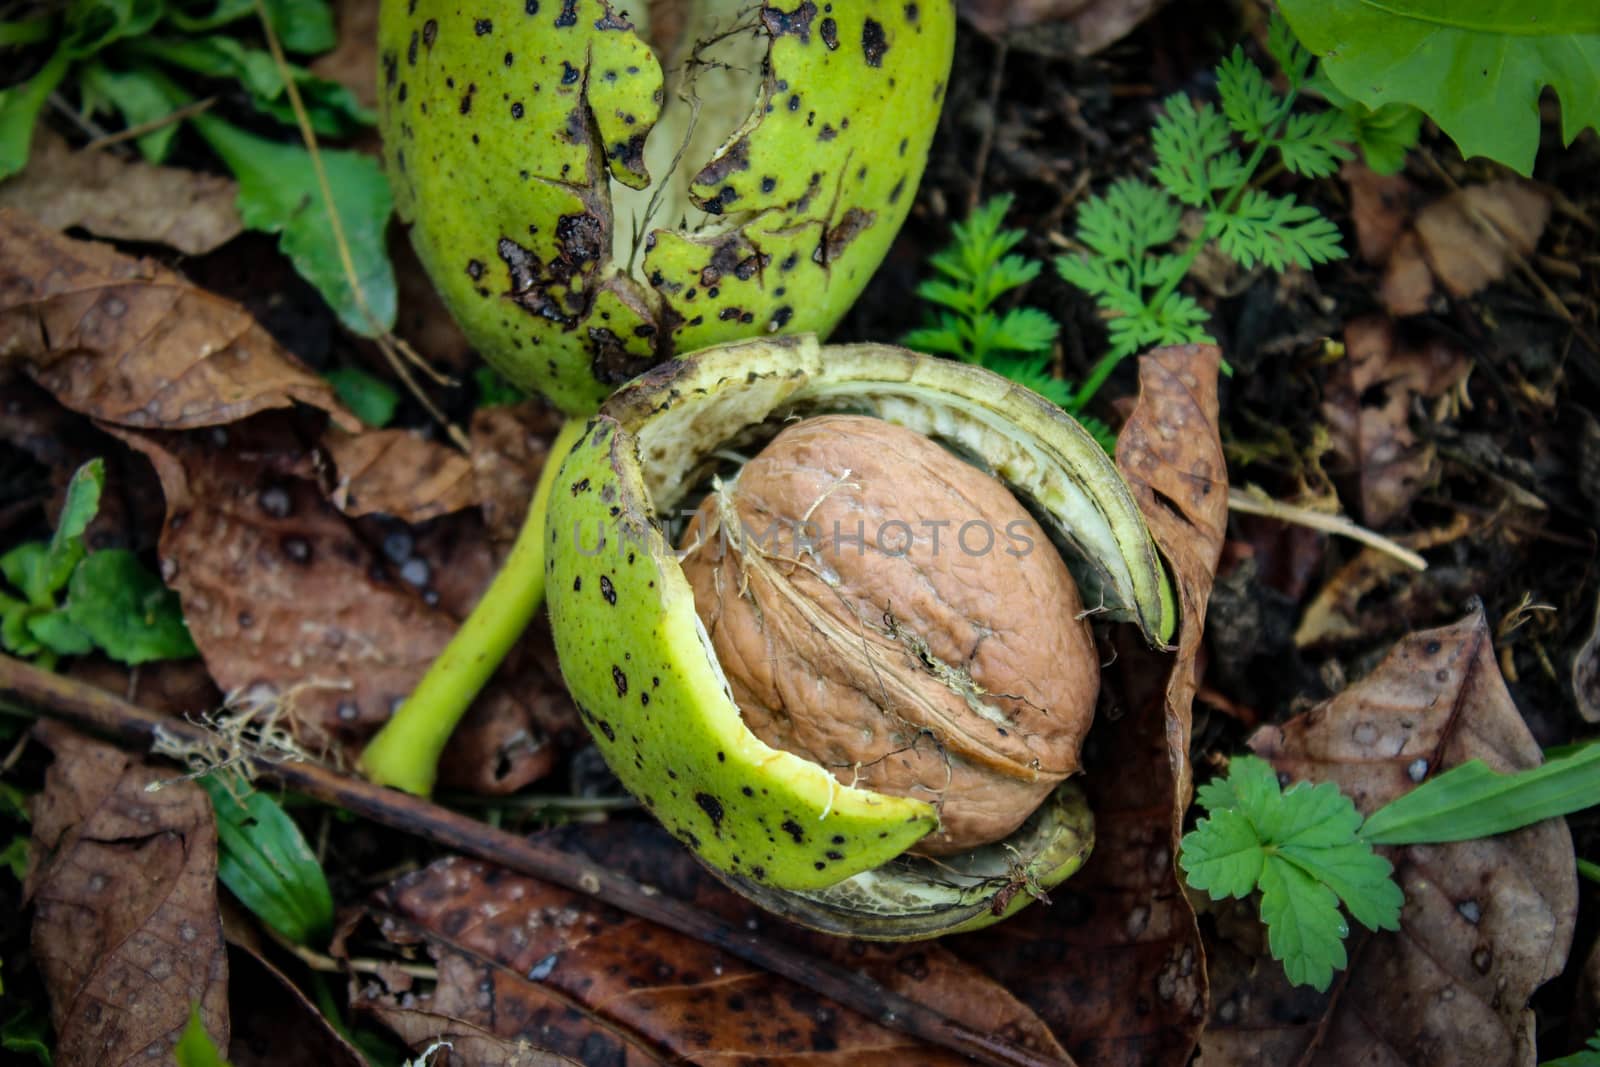 Close up of a ripe walnut inside the green shell fell to the ground among the dried leaves. Zavidovici, Bosnia and Herzegovina.